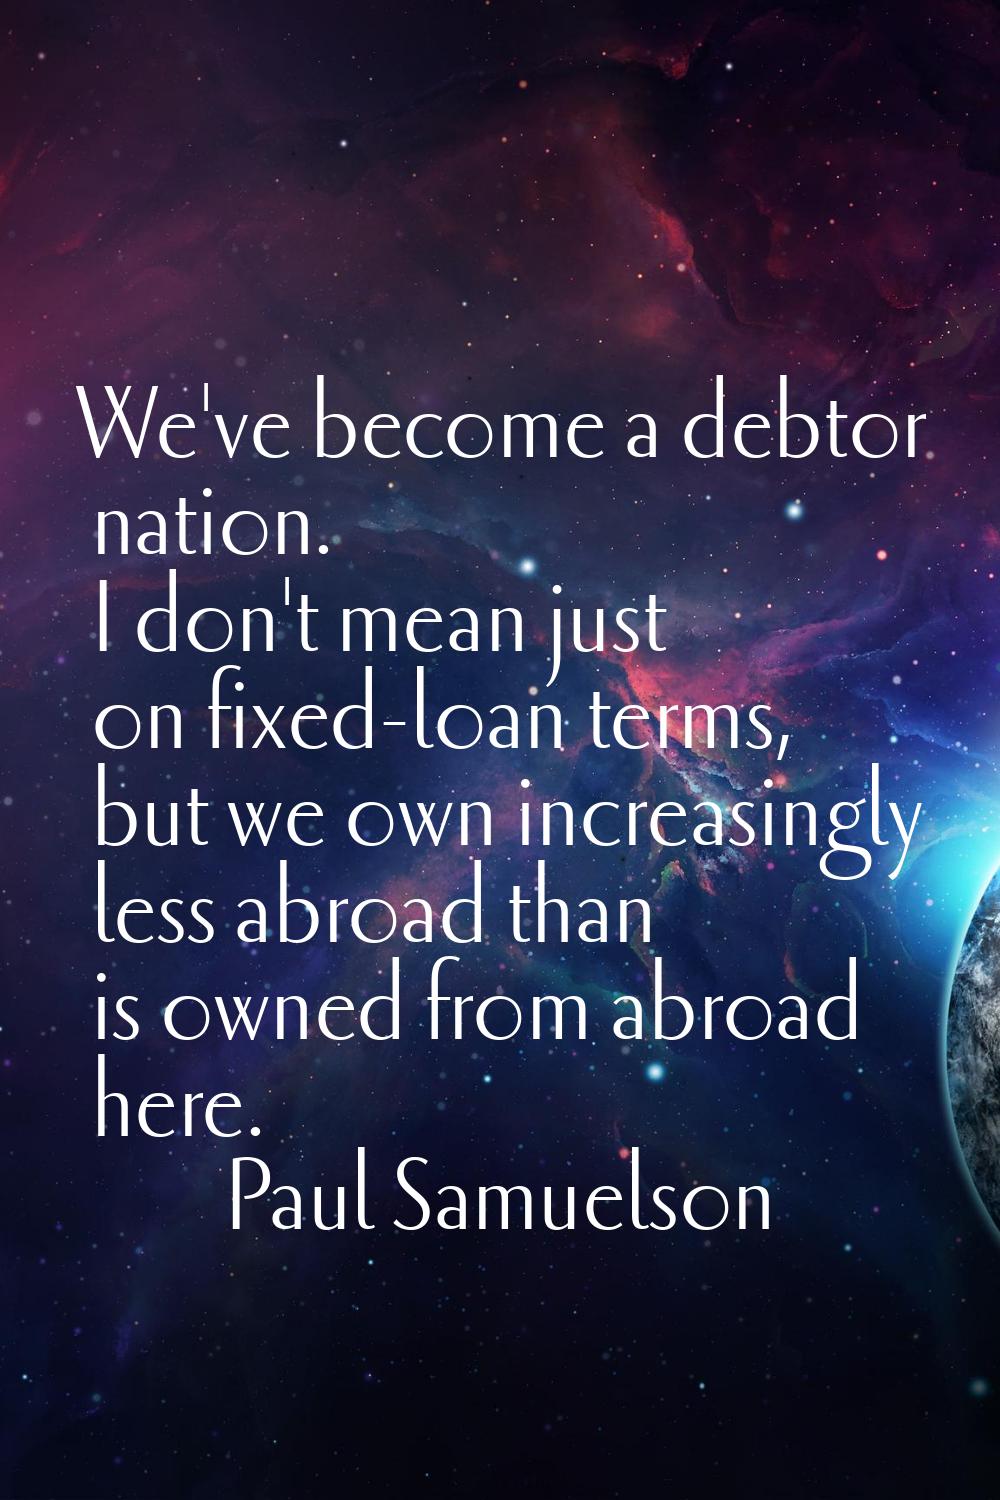 We've become a debtor nation. I don't mean just on fixed-loan terms, but we own increasingly less a